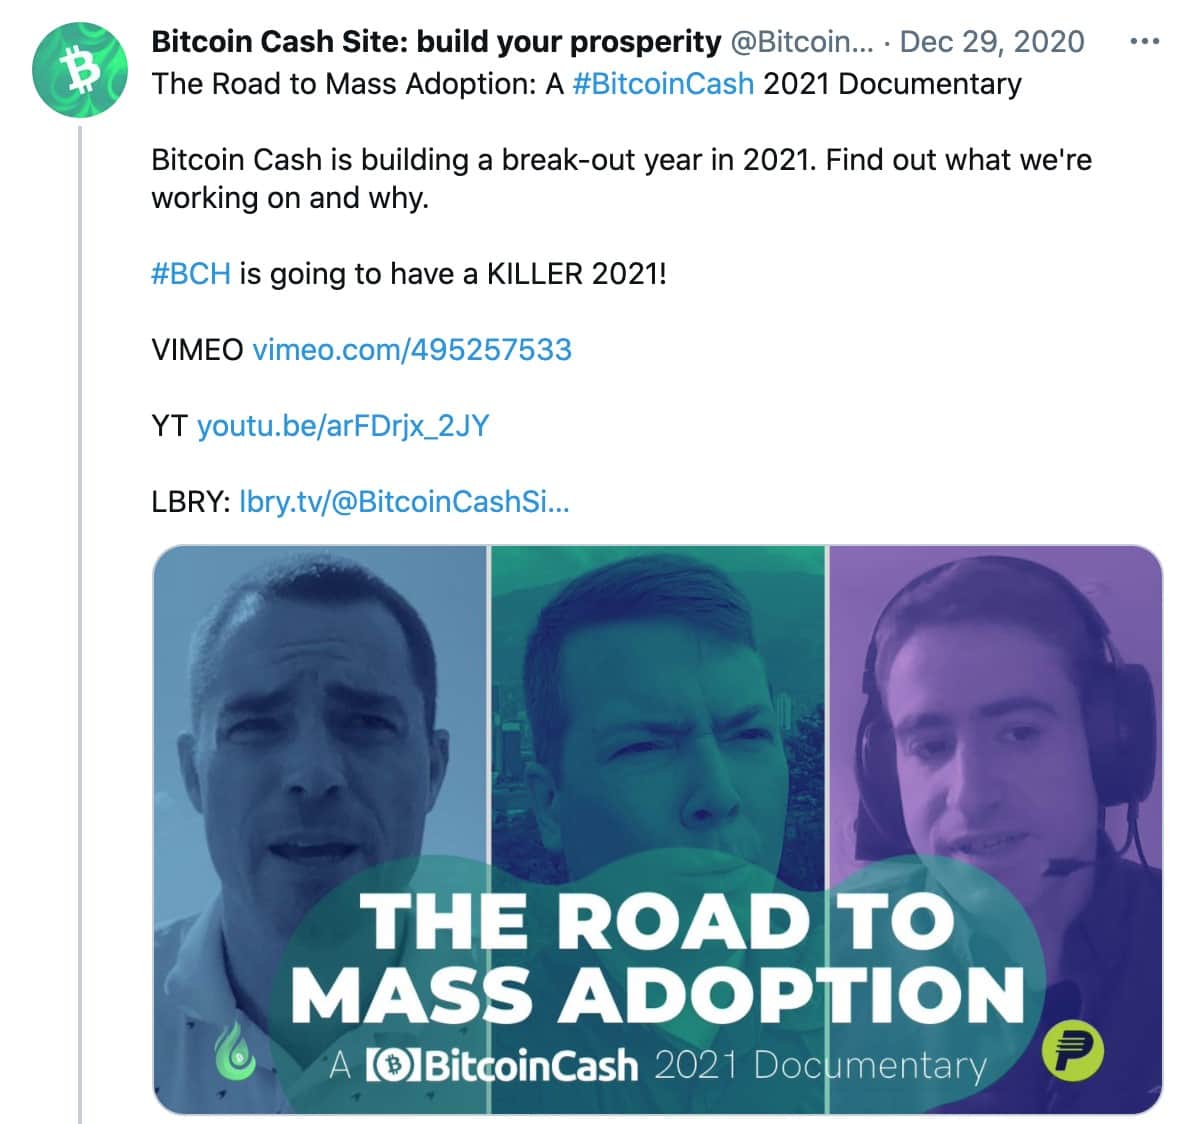 Le documentaire Bitcoin Cash : The Road to Mass Adoption